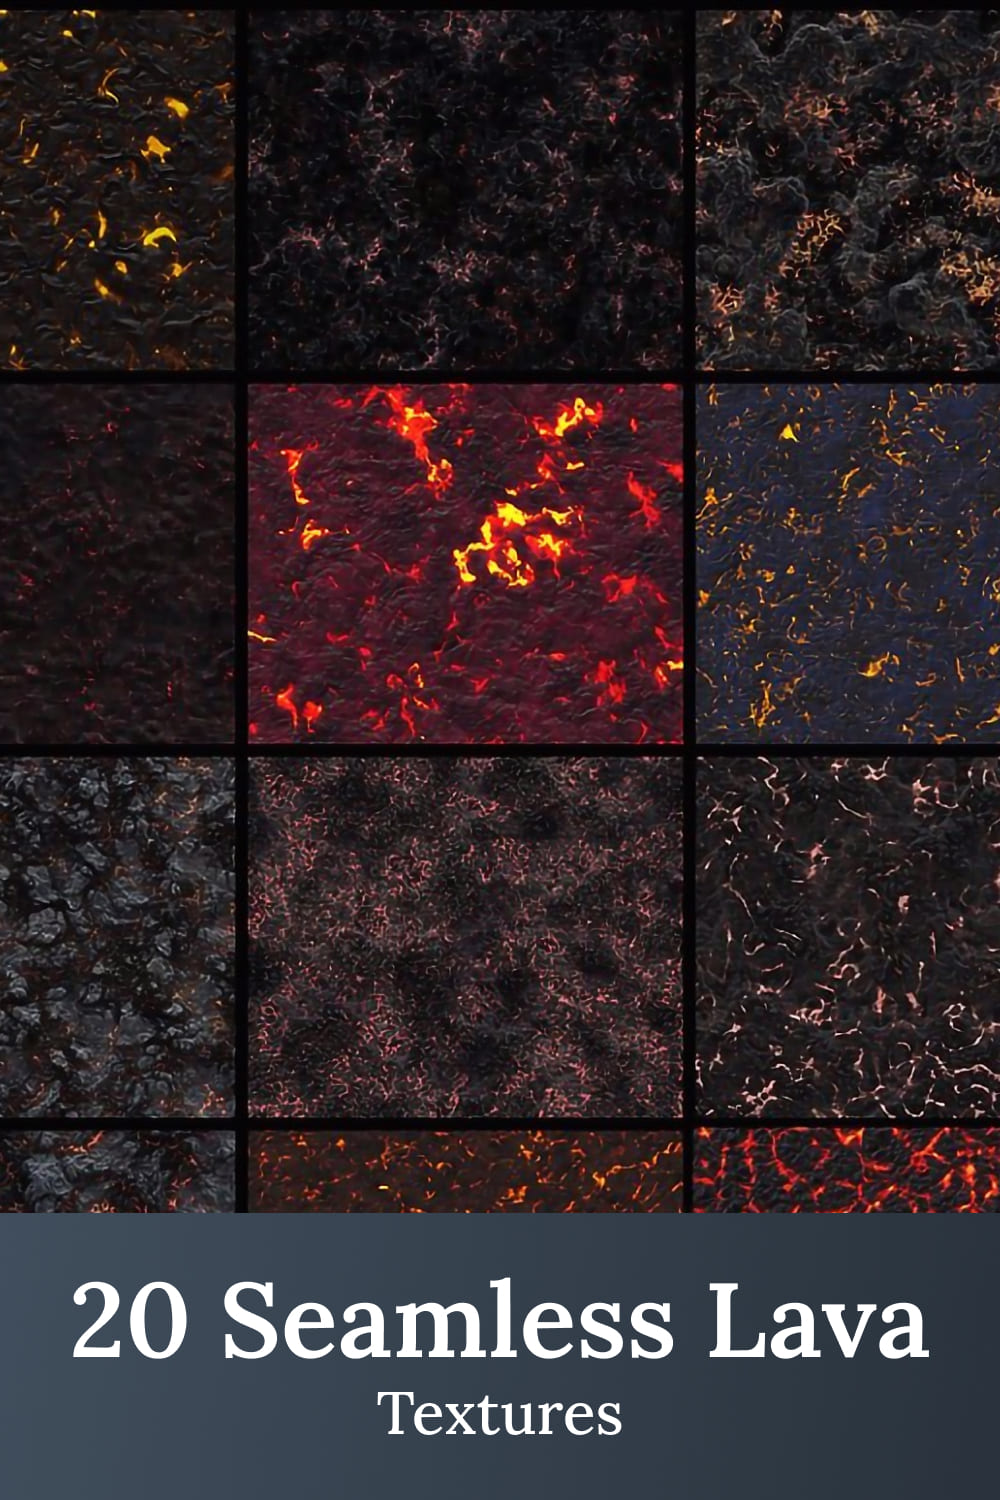 20 seamless lava textures - pinterest image preview.